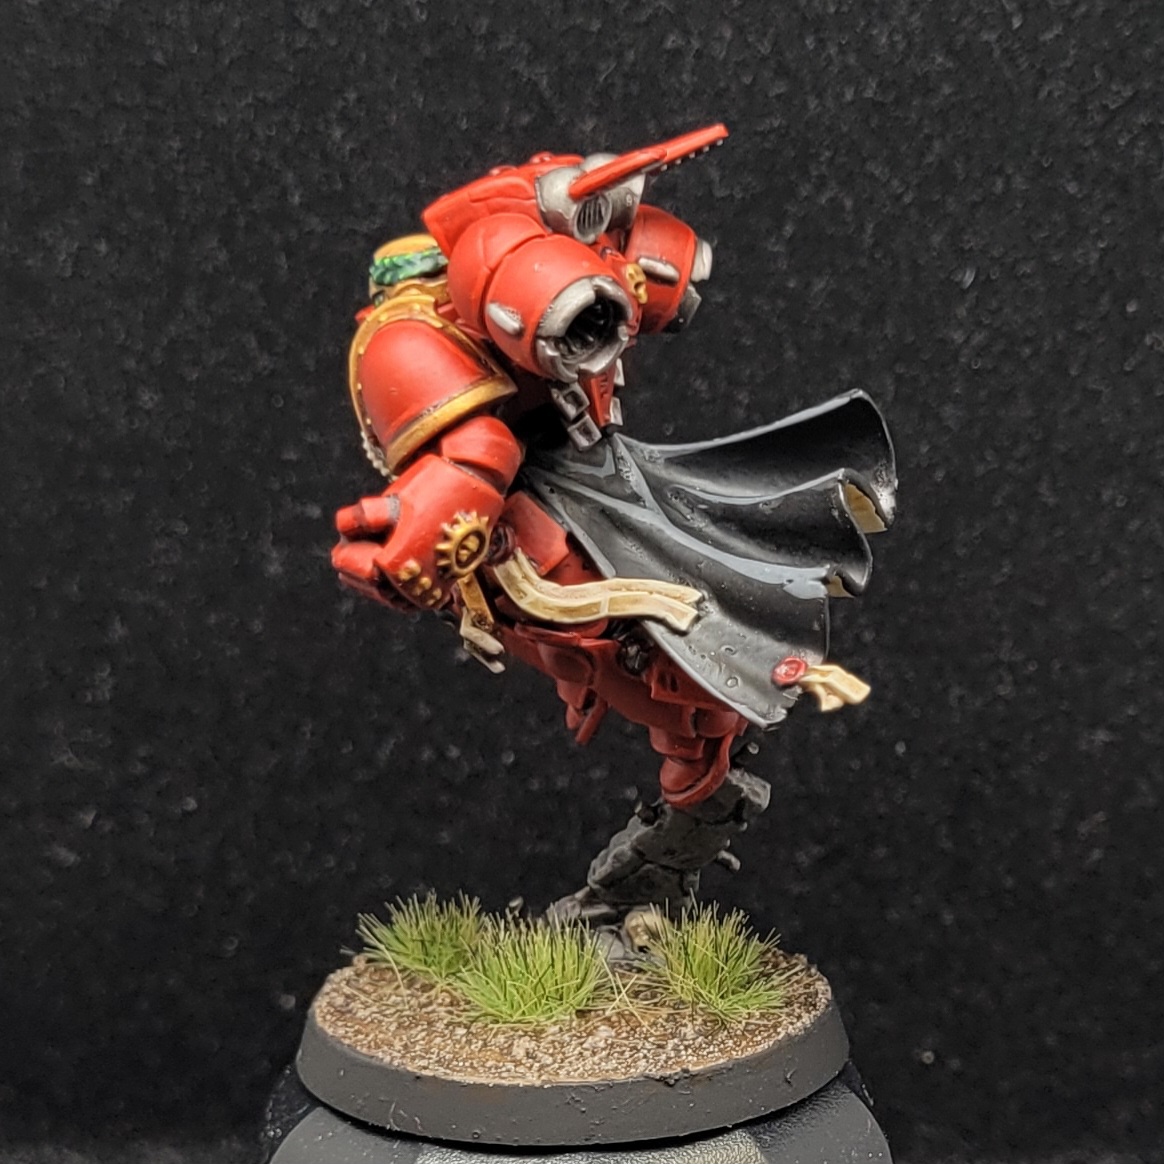 Can he smash the enemy? Blood Angels Space Marine Captain with Jump Pack.
#warhammercommunity #gamesworkshop #gw #warhammer #warhammer40k #spacemarines #bloodangels